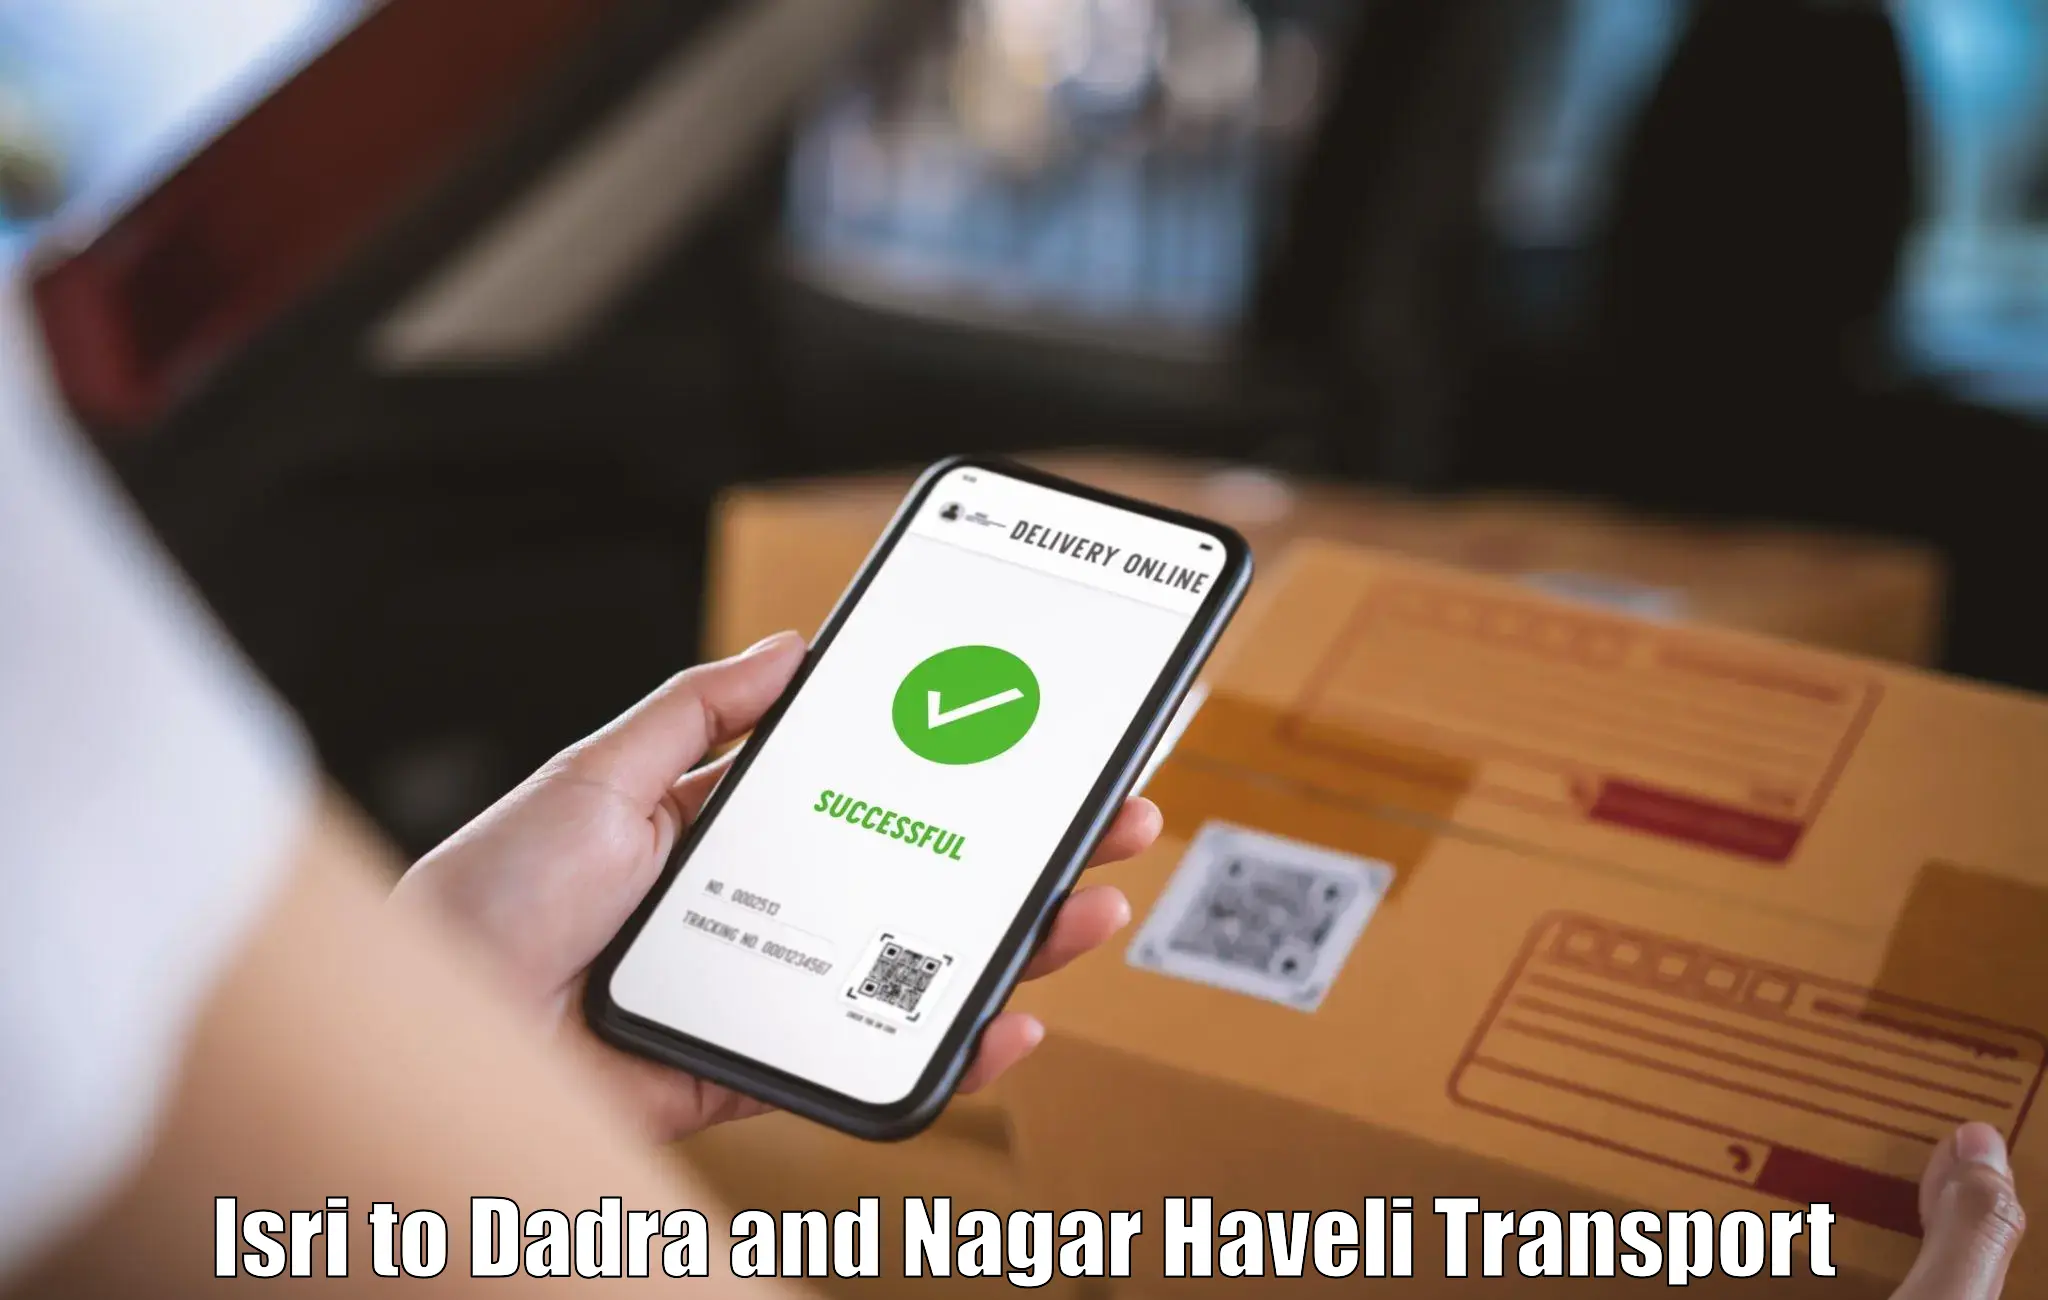 Air freight transport services Isri to Dadra and Nagar Haveli